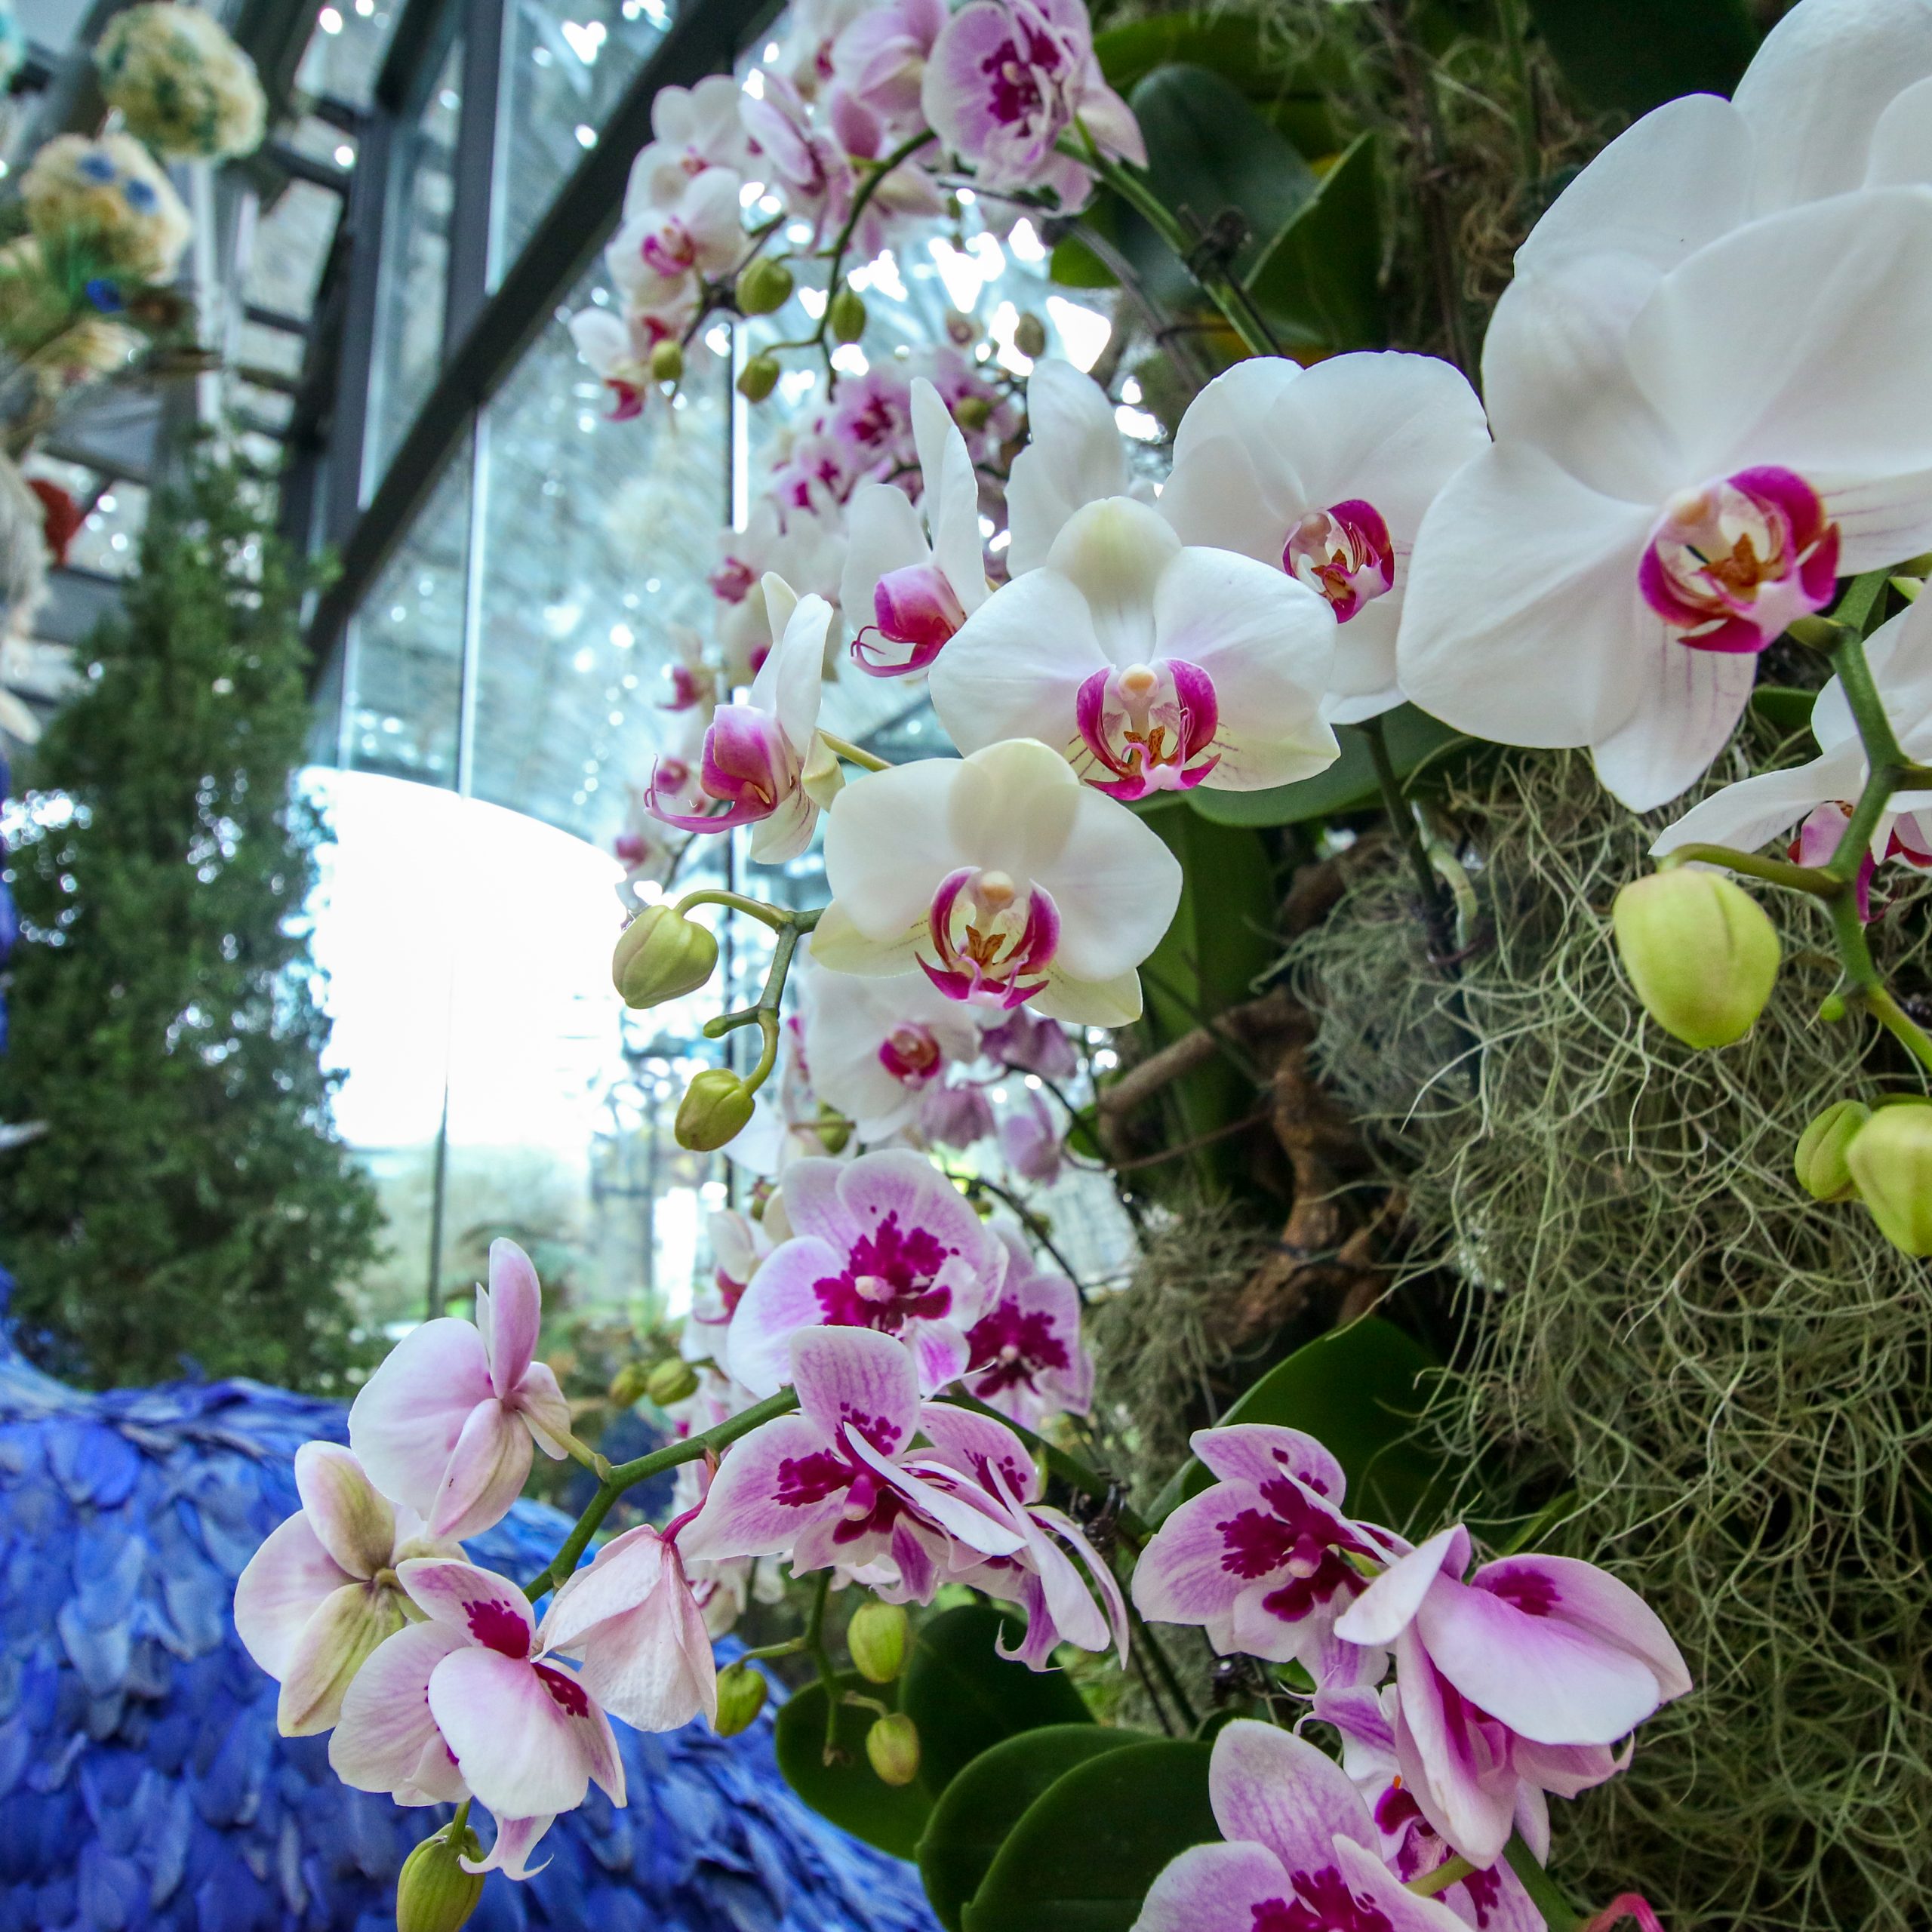 Gardens by the Bay's Floral Fantasy reopening on Nov. 21 with 5m-tall floral  sculpture -  - News from Singapore, Asia and around the world